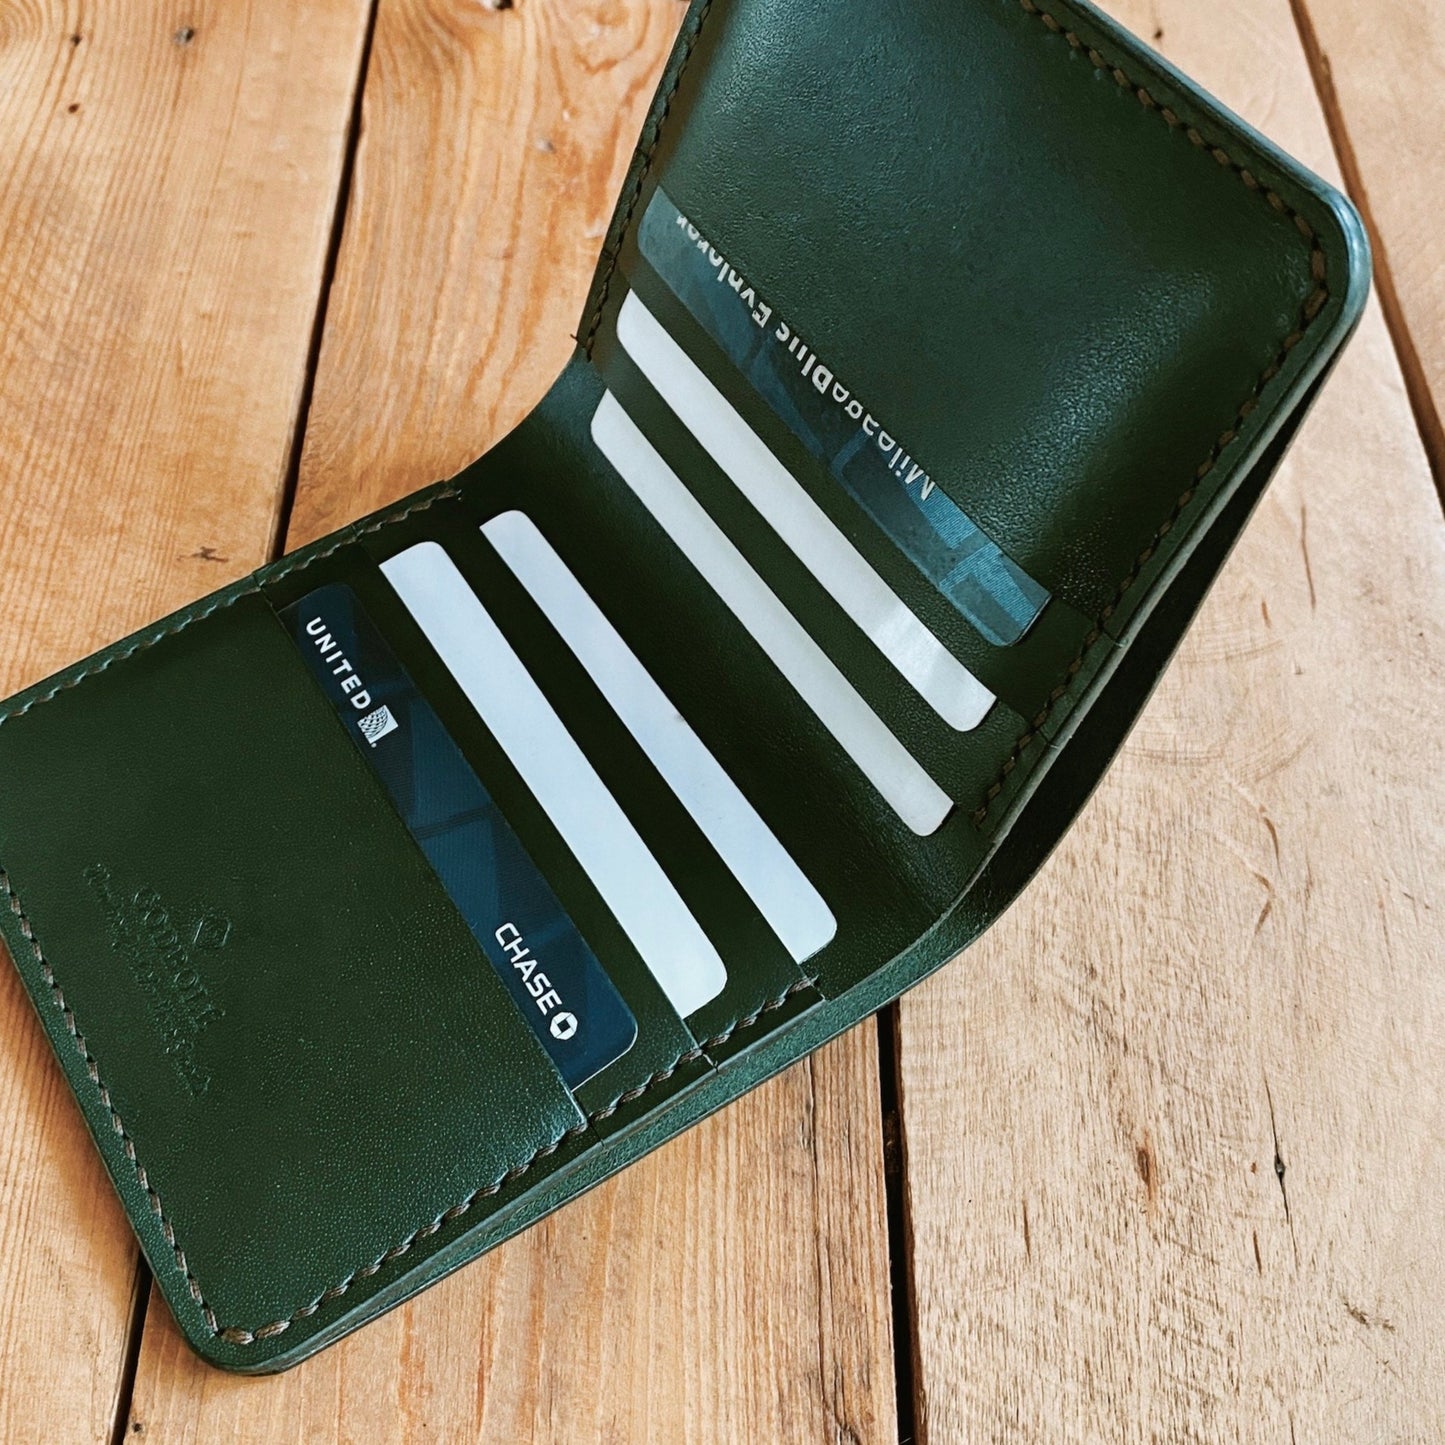 This is a slim wallet made with full grain leather and is hand stitched with saddle stitching.